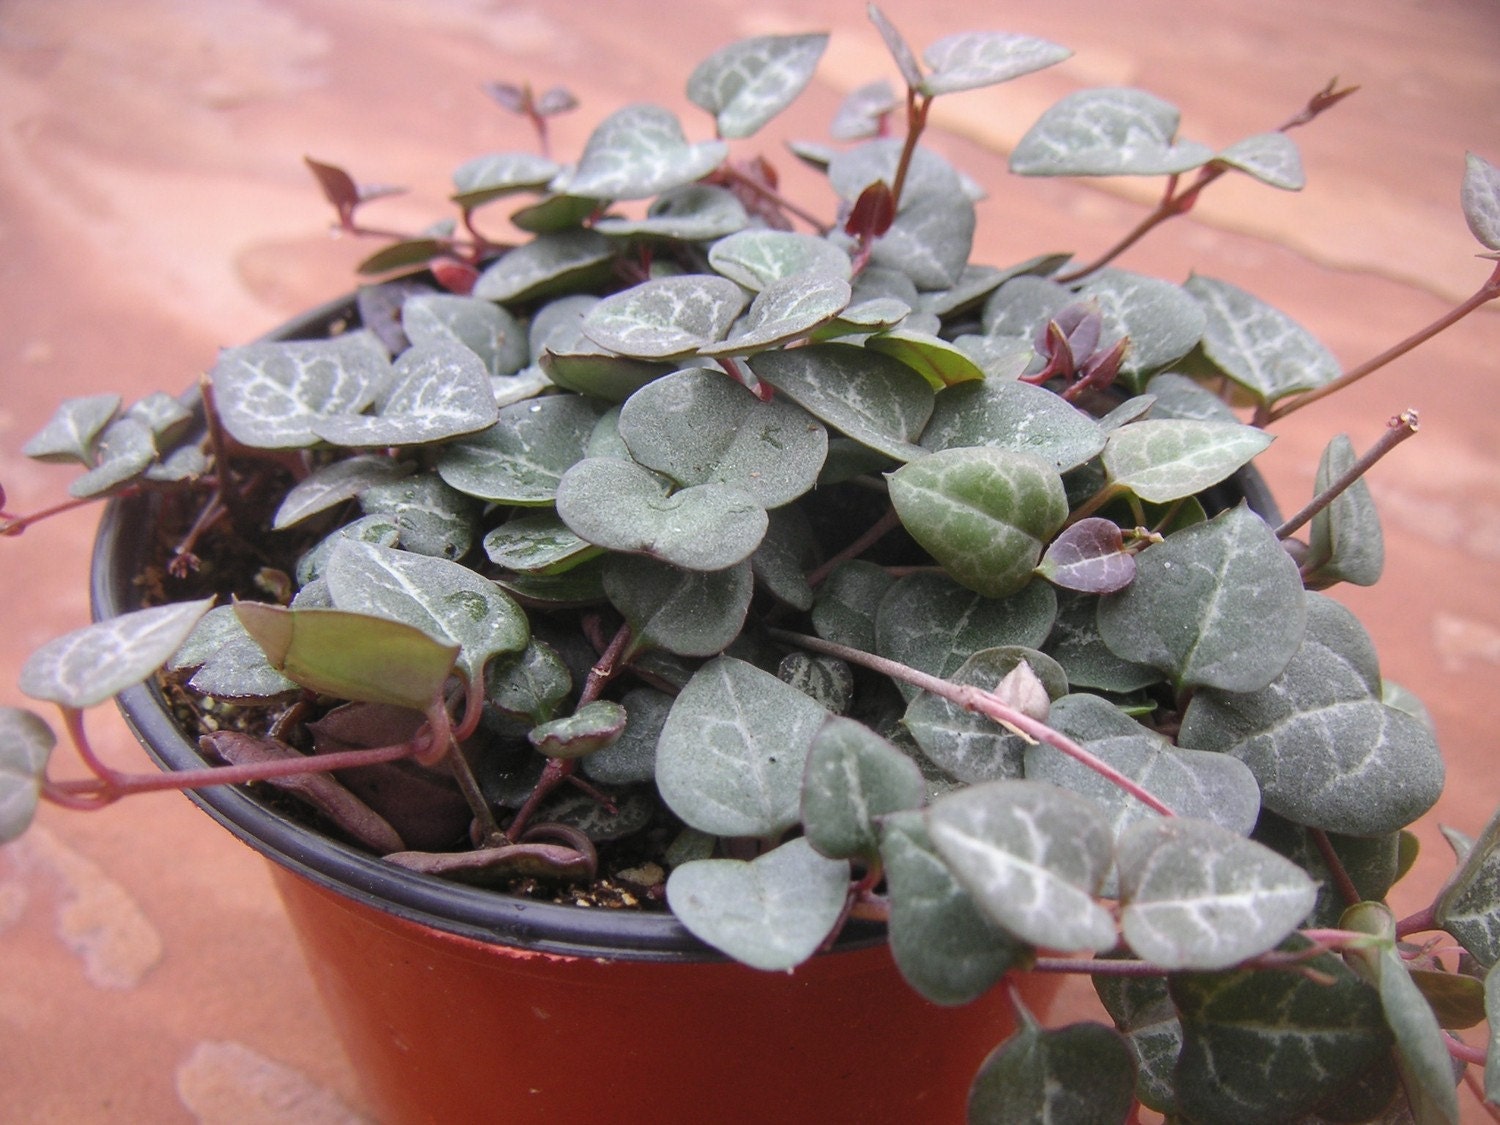 variegated string of hearts plant for sale